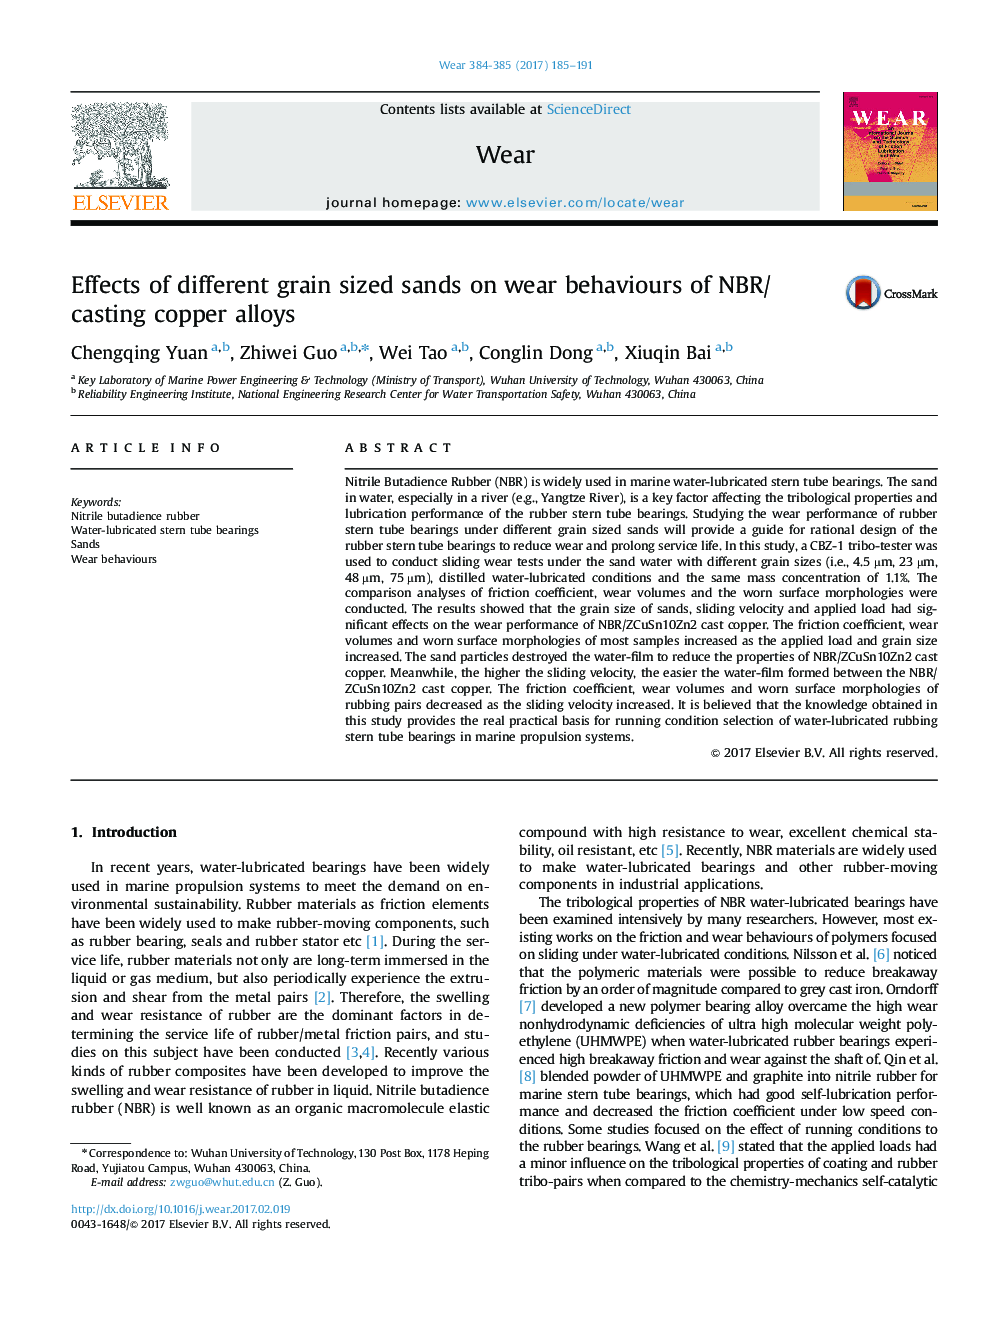 Effects of different grain sized sands on wear behaviours of NBR/casting copper alloys